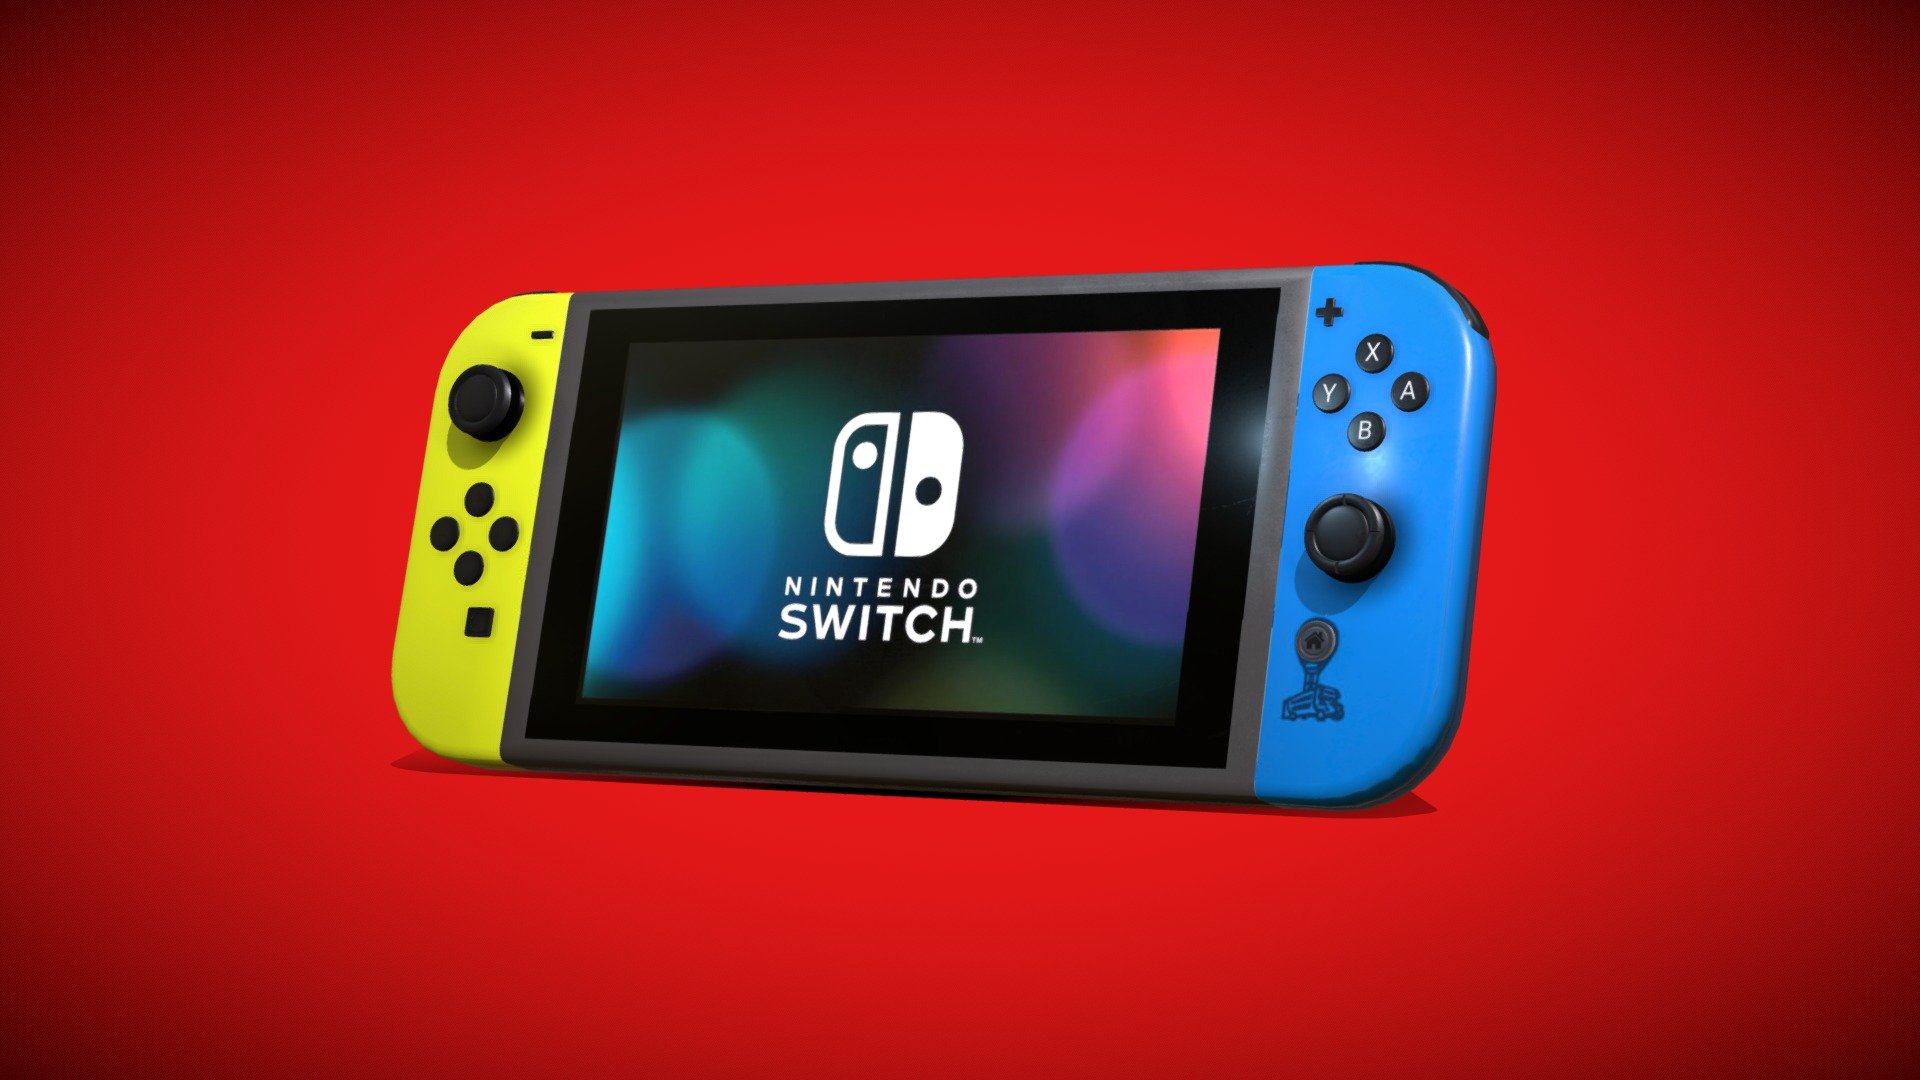 Game console nintendo switch. Not very suitable for gaming. Has a good topology, then it will be a demanding game for the game. If you want to use it for your work, then here is the link: https://www.artstation.com/rediquiest/store - Nintendo Switch - 3D model by Rediquiestik 3d model